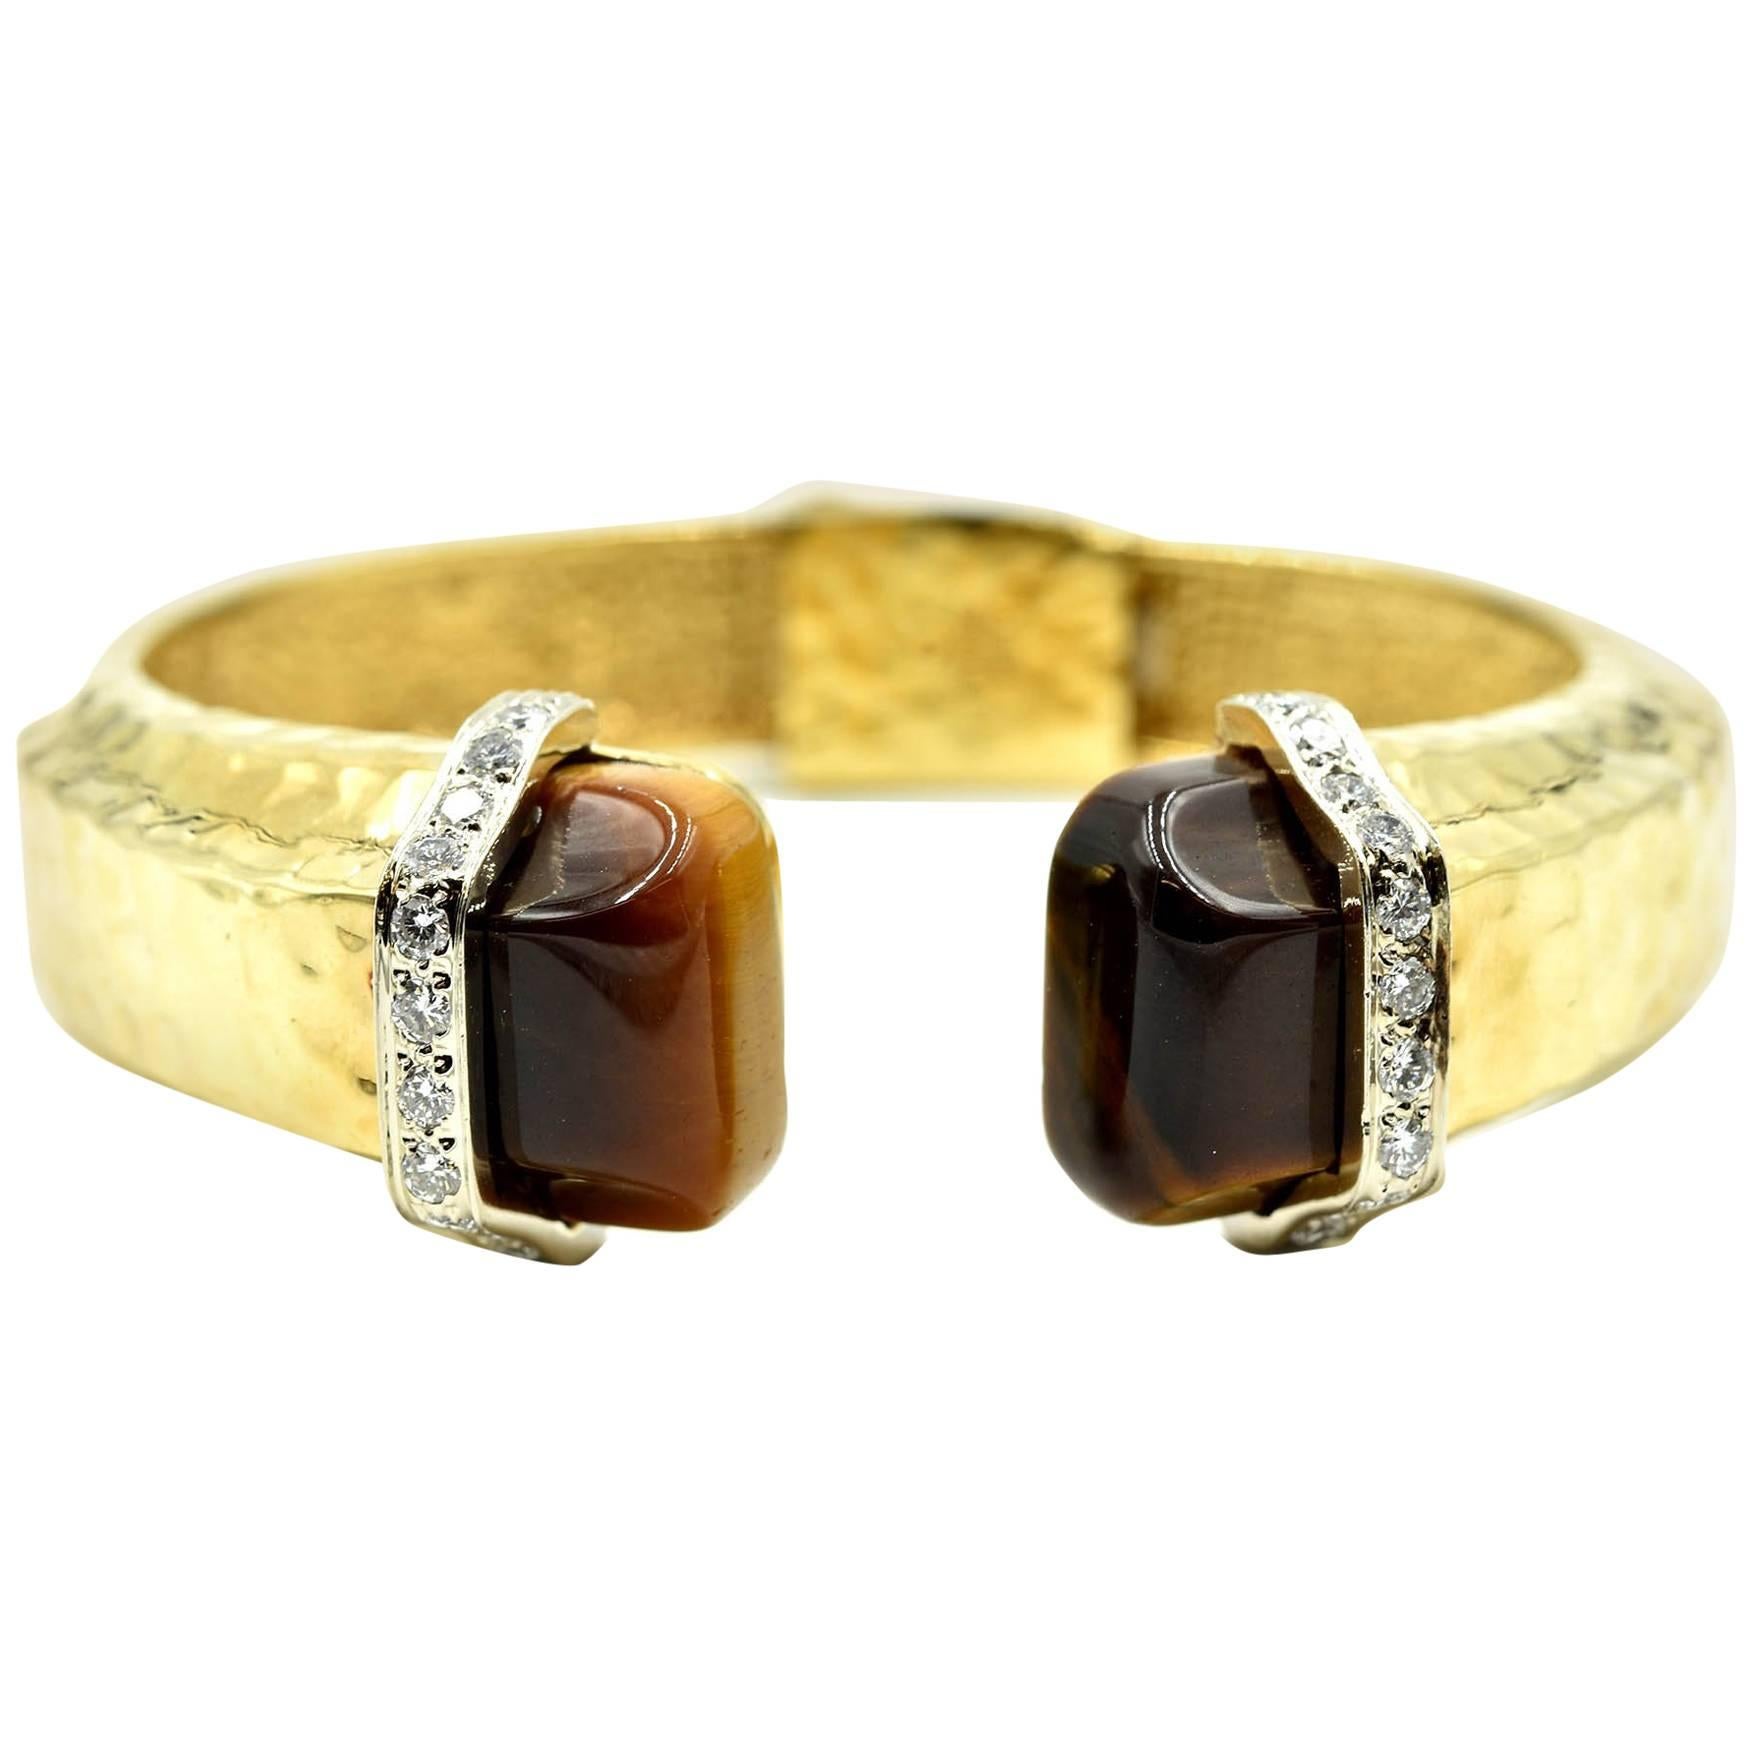 Bangle Bracelet Accented with Diamonds and Tigers Eye 18k Yellow Gold